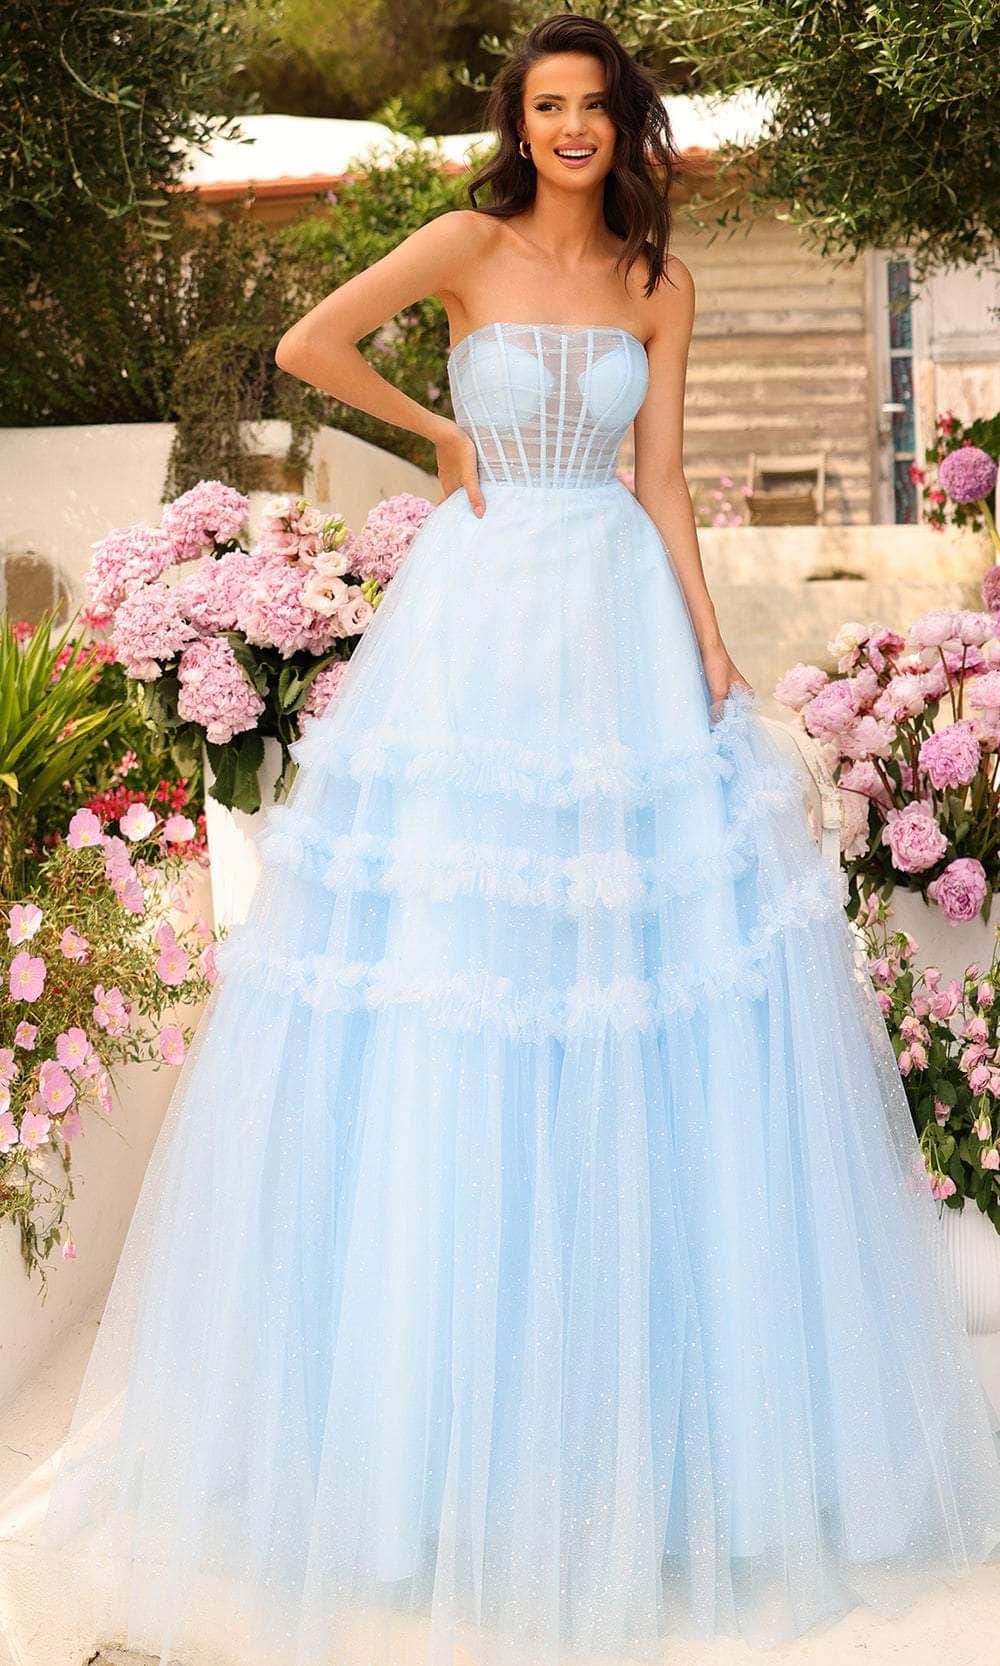 Image of Amarra 88794 - Sheer Corset Prom Dress with Slit